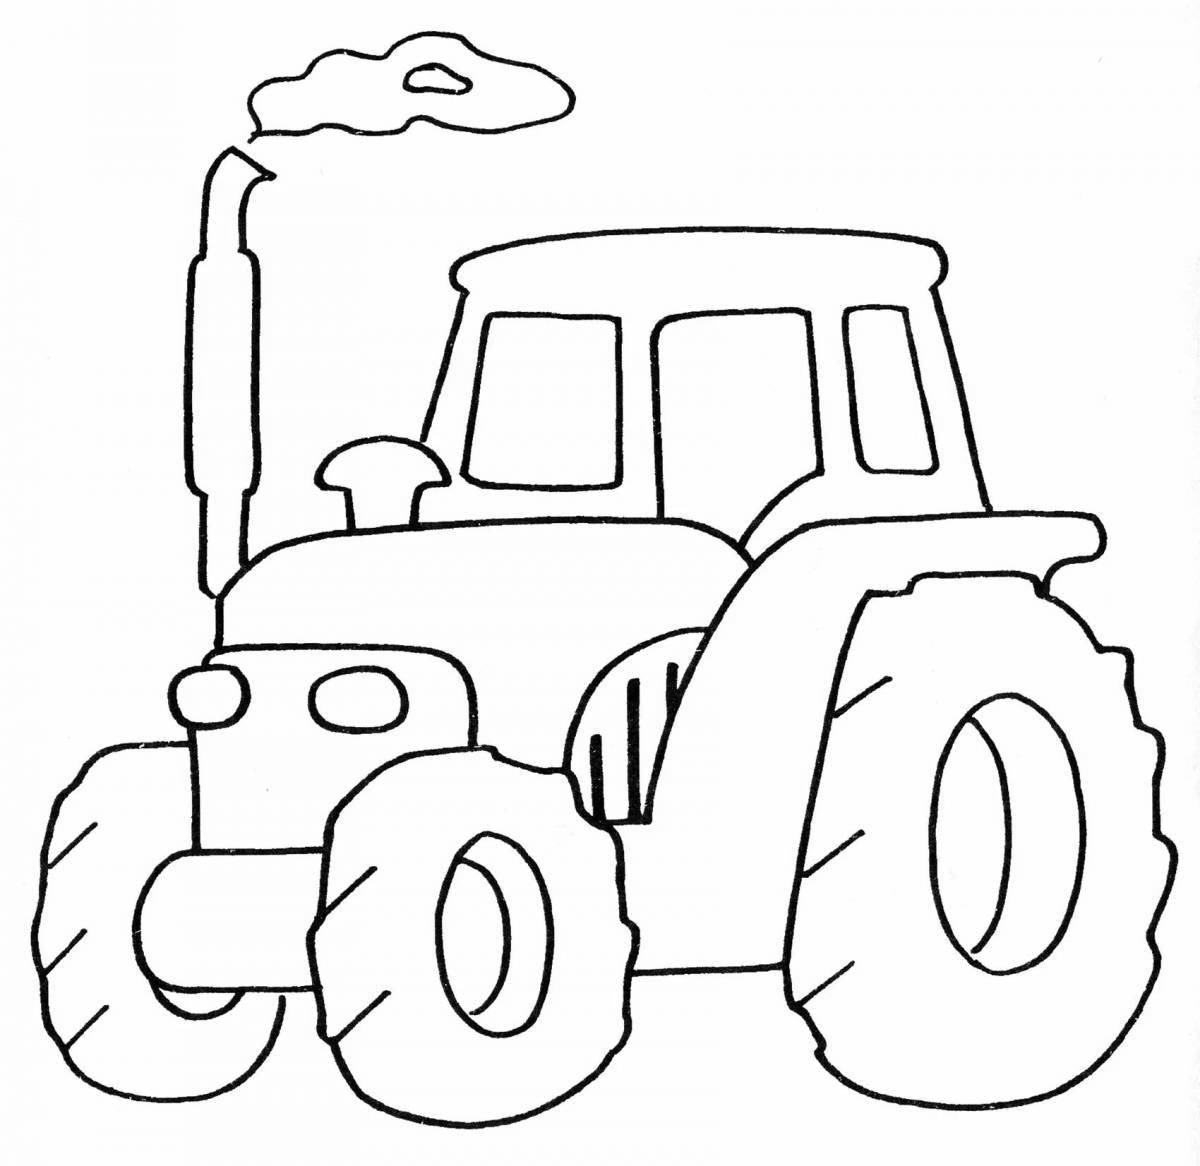 Colorful tractor coloring page for 3-4 year olds